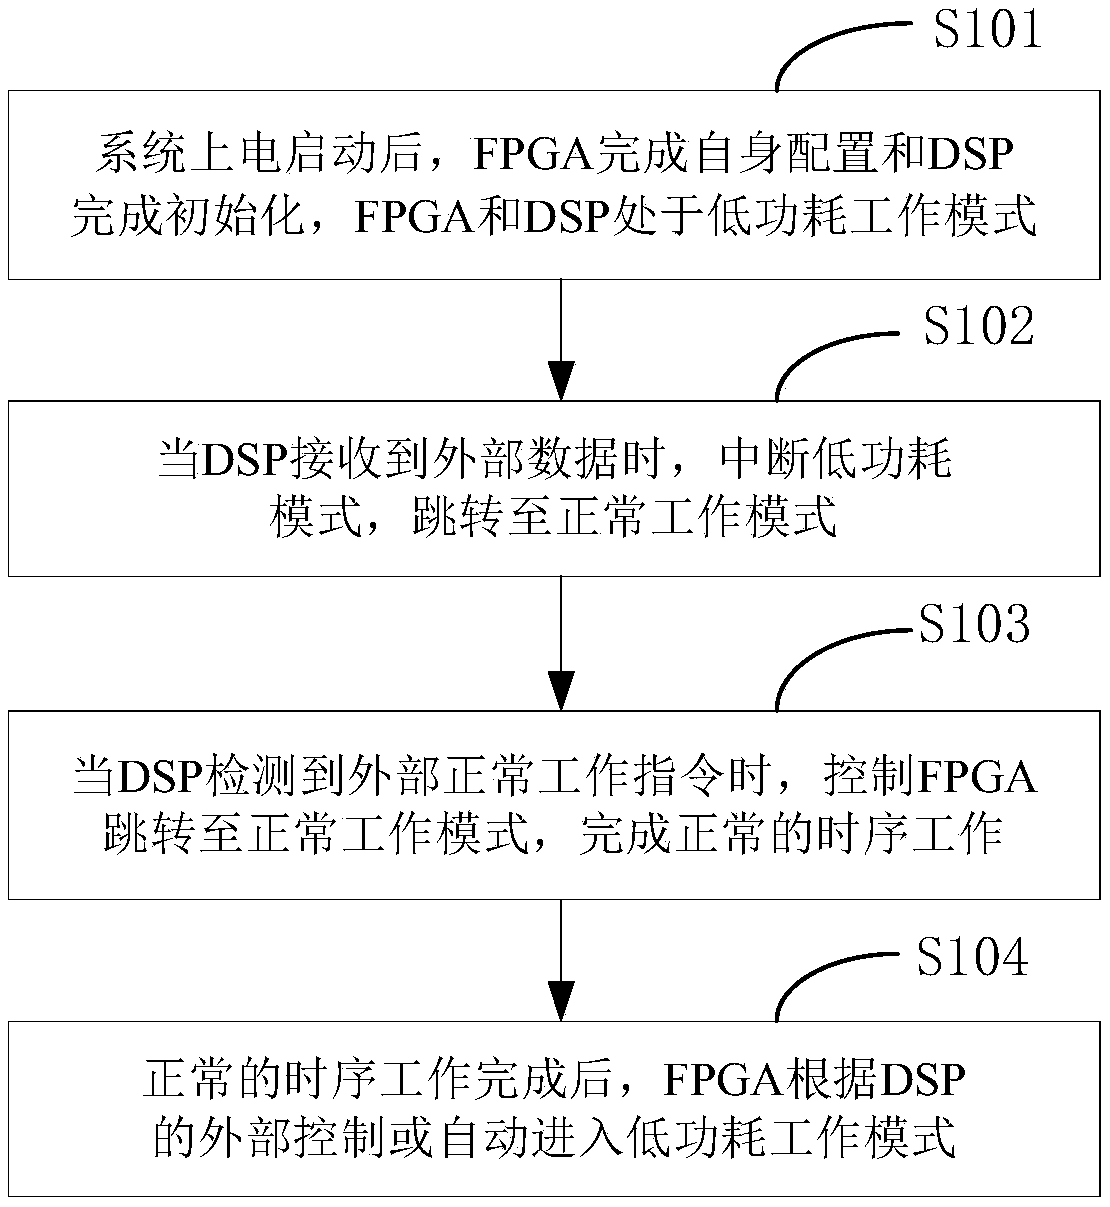 Low-power-consumption processing method based on an FPGA and a DSP architecture